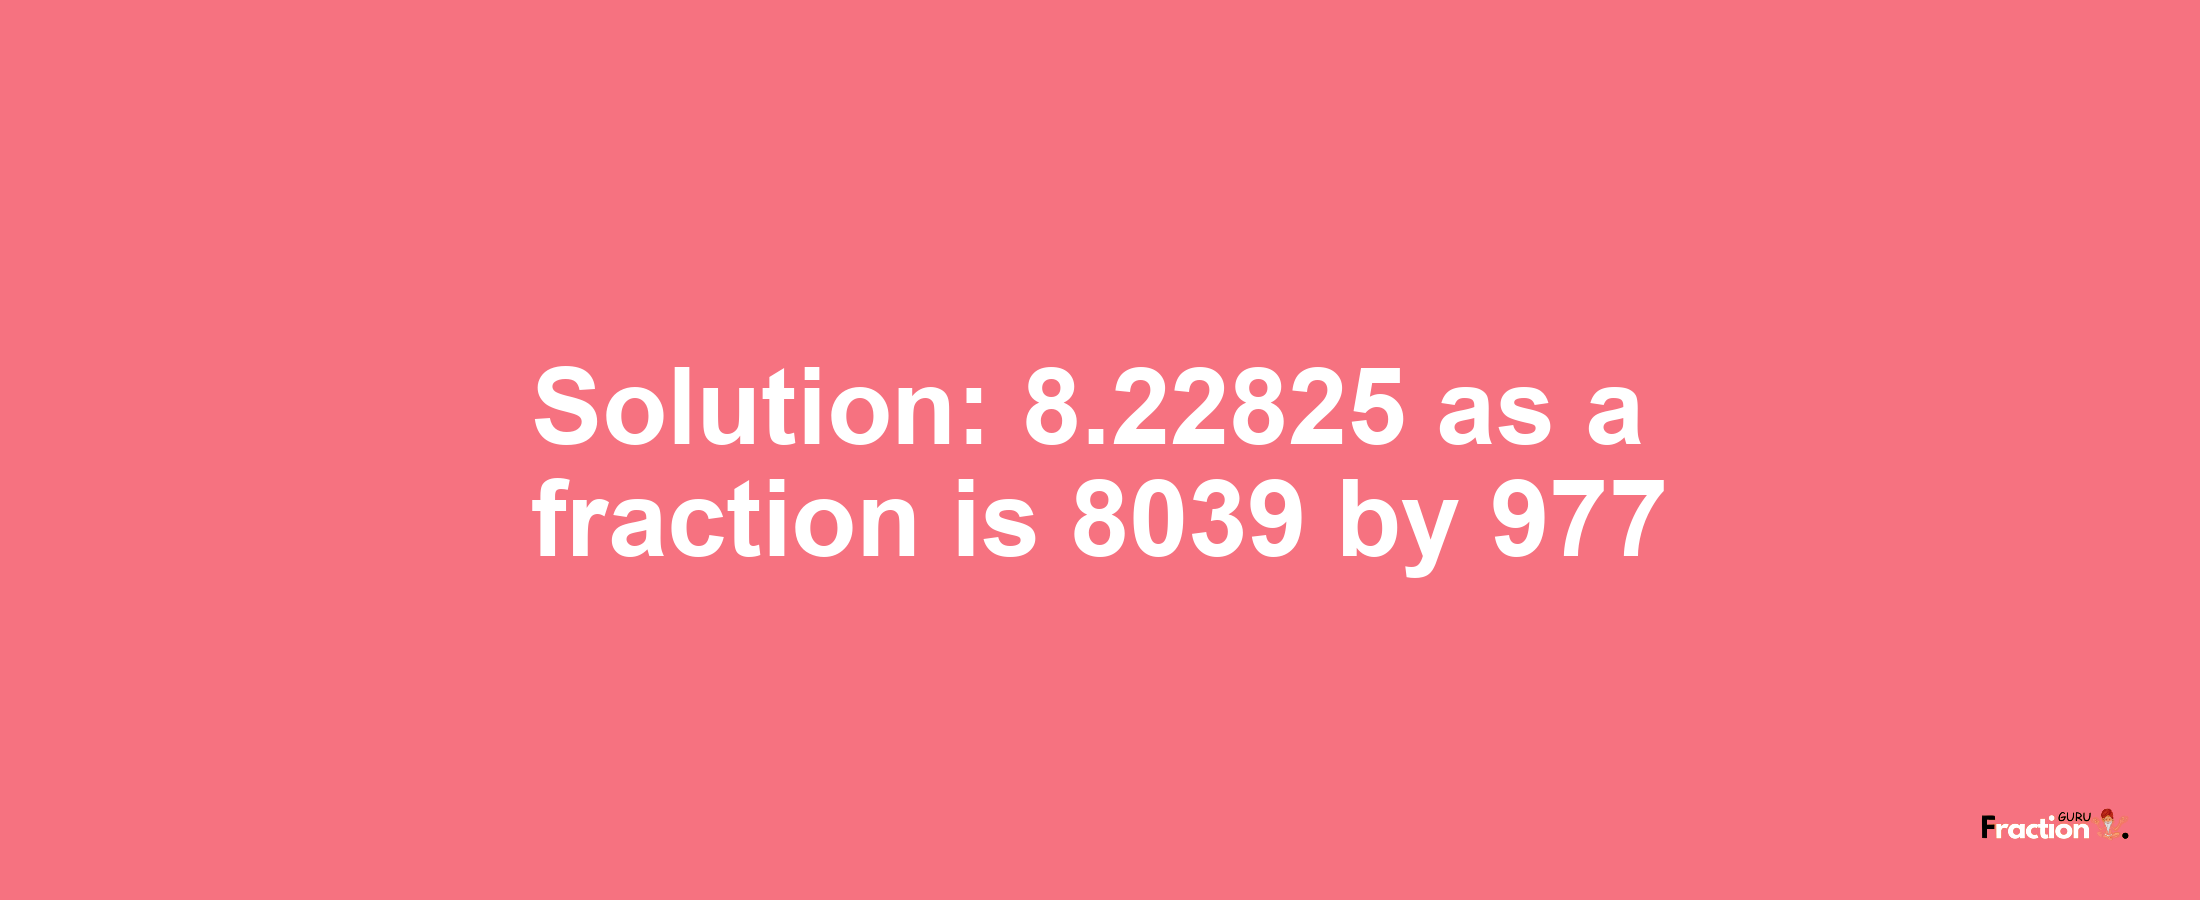 Solution:8.22825 as a fraction is 8039/977